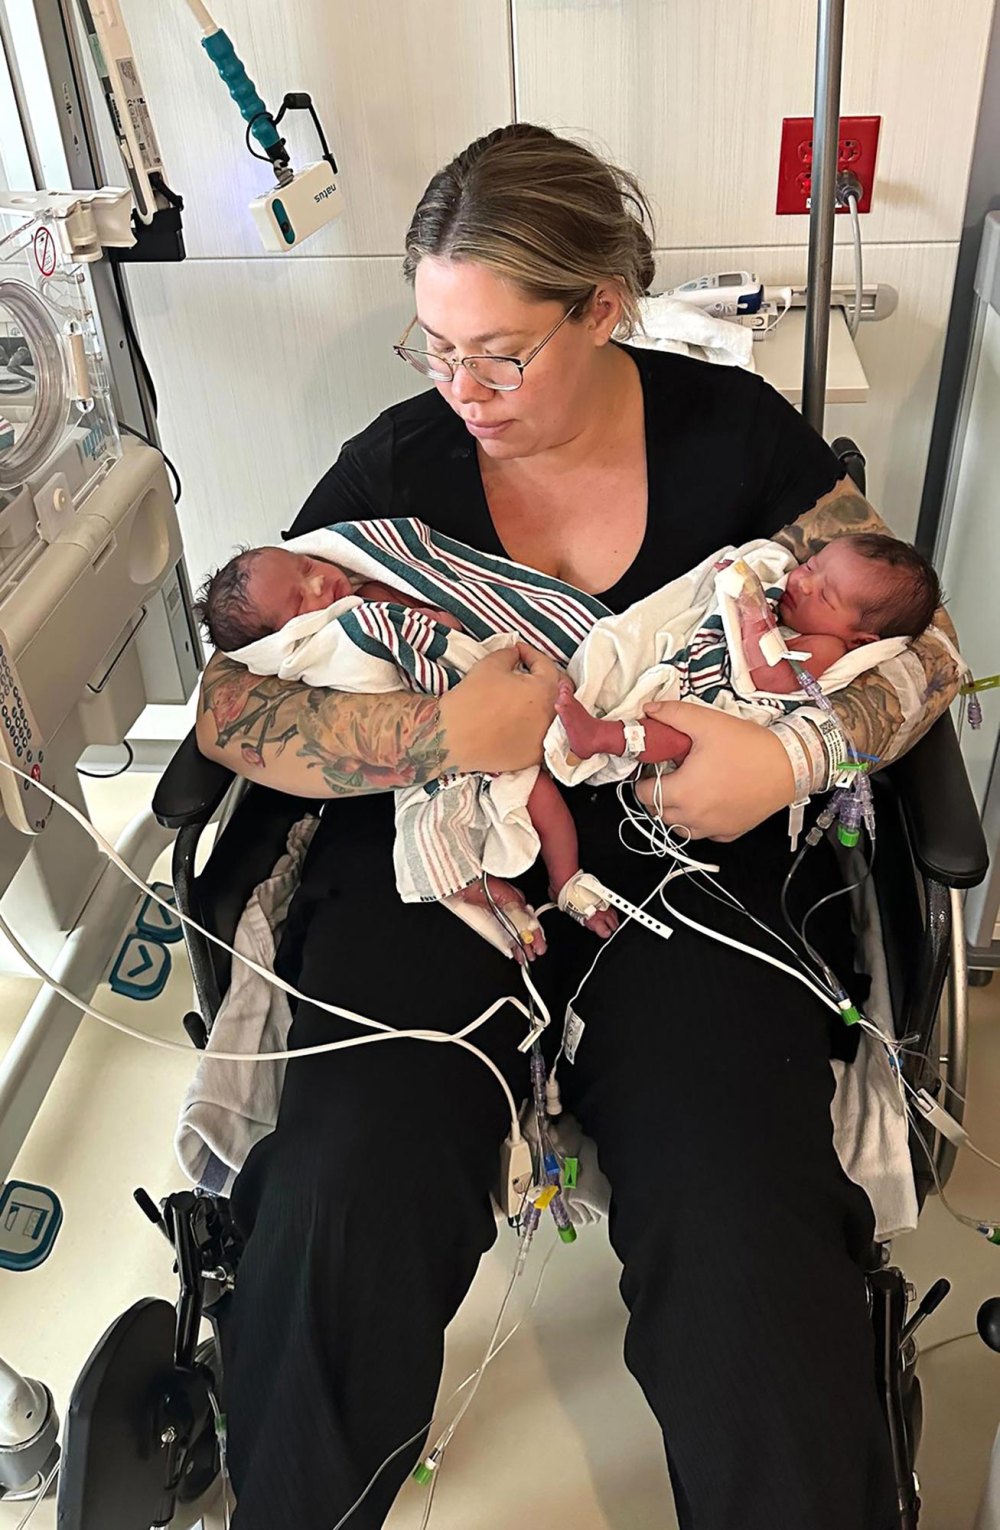 Teen Mom 2 Alum Kailyn Lowry Almost Named Newborn Son Aire But It Was Too Kardashian